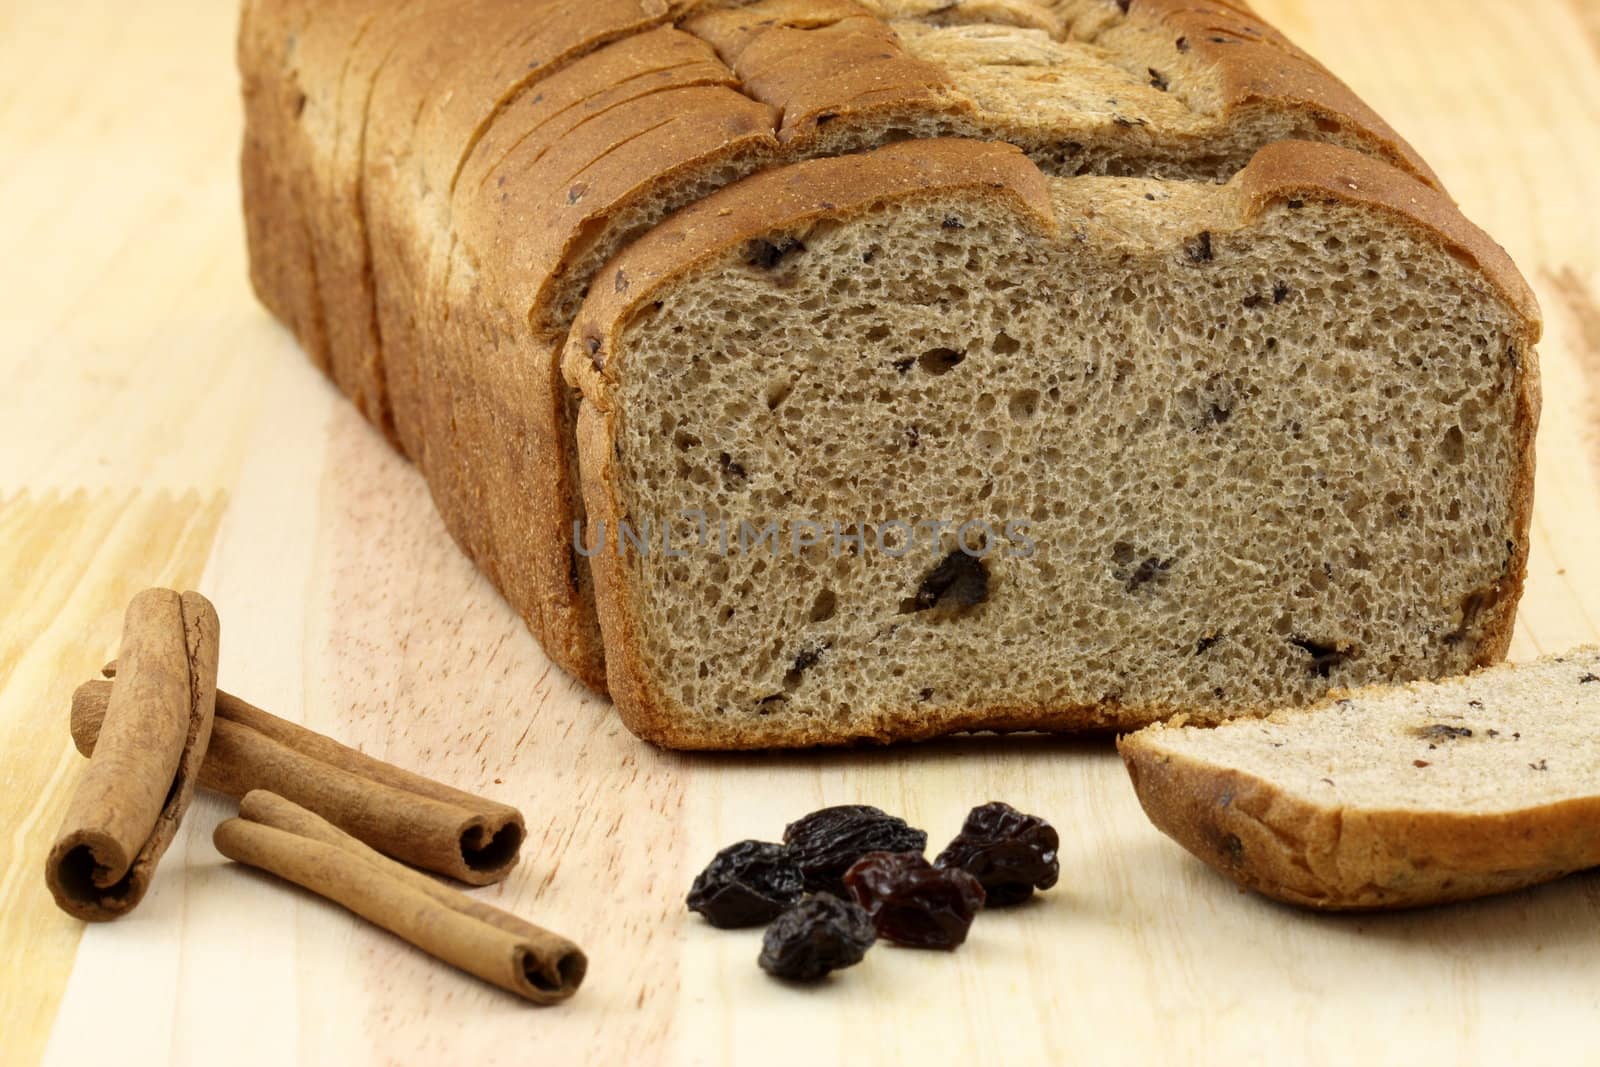 fresh baked  wholegrain whole wheat raisins and nuts bread with lots of assorted healthy ingredients   